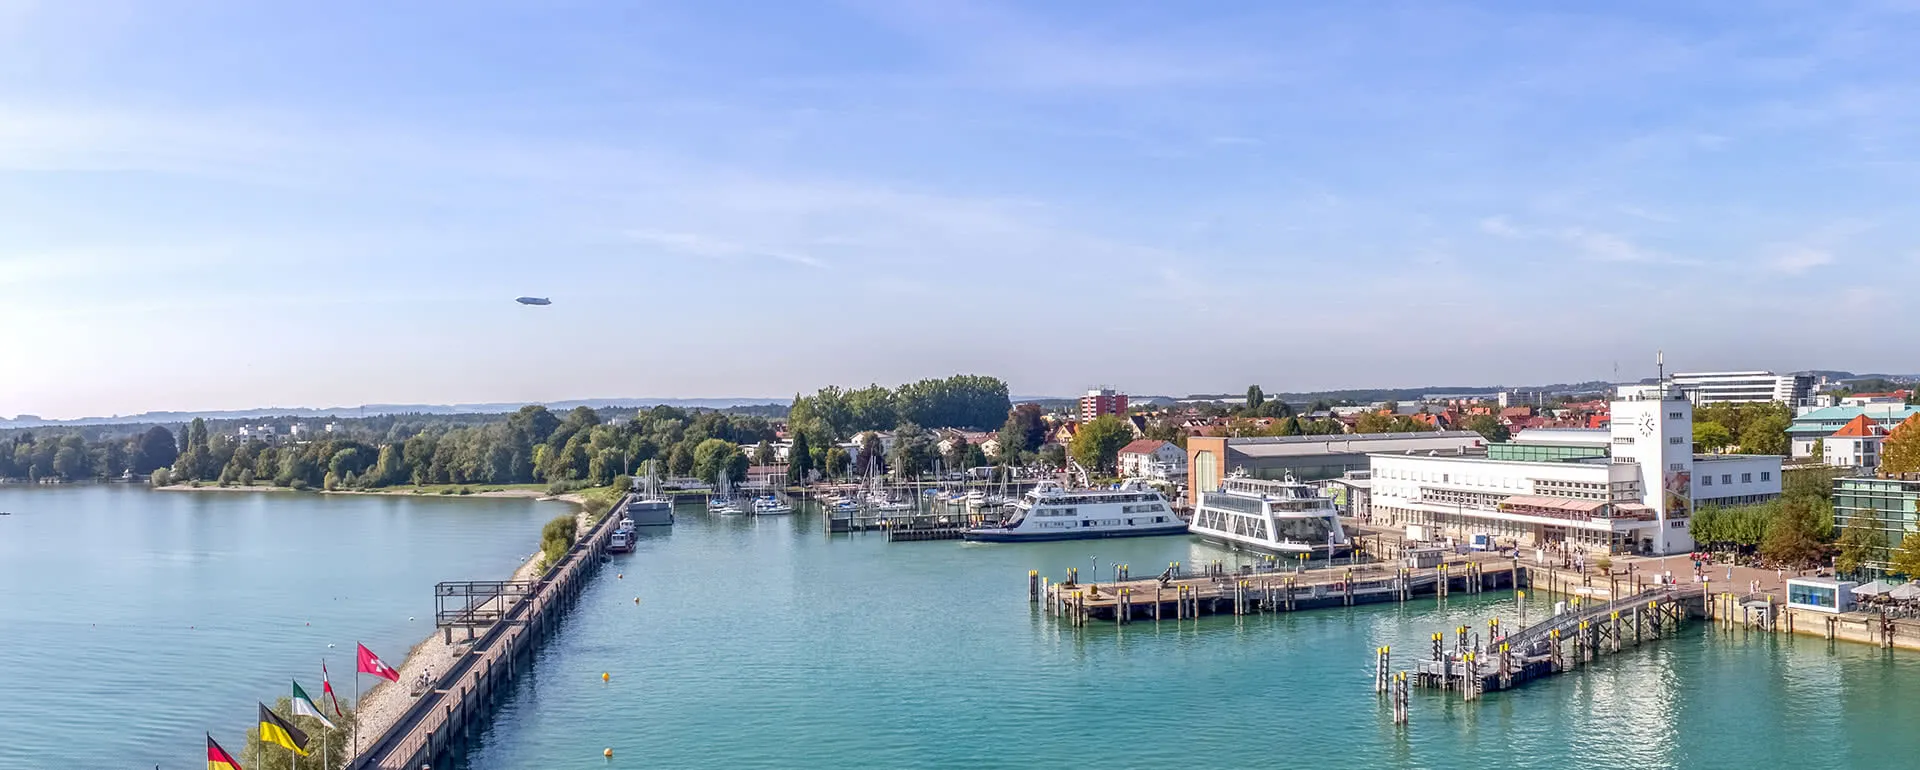 Friedrichshafen - the destination for hotels with multi-bed rooms